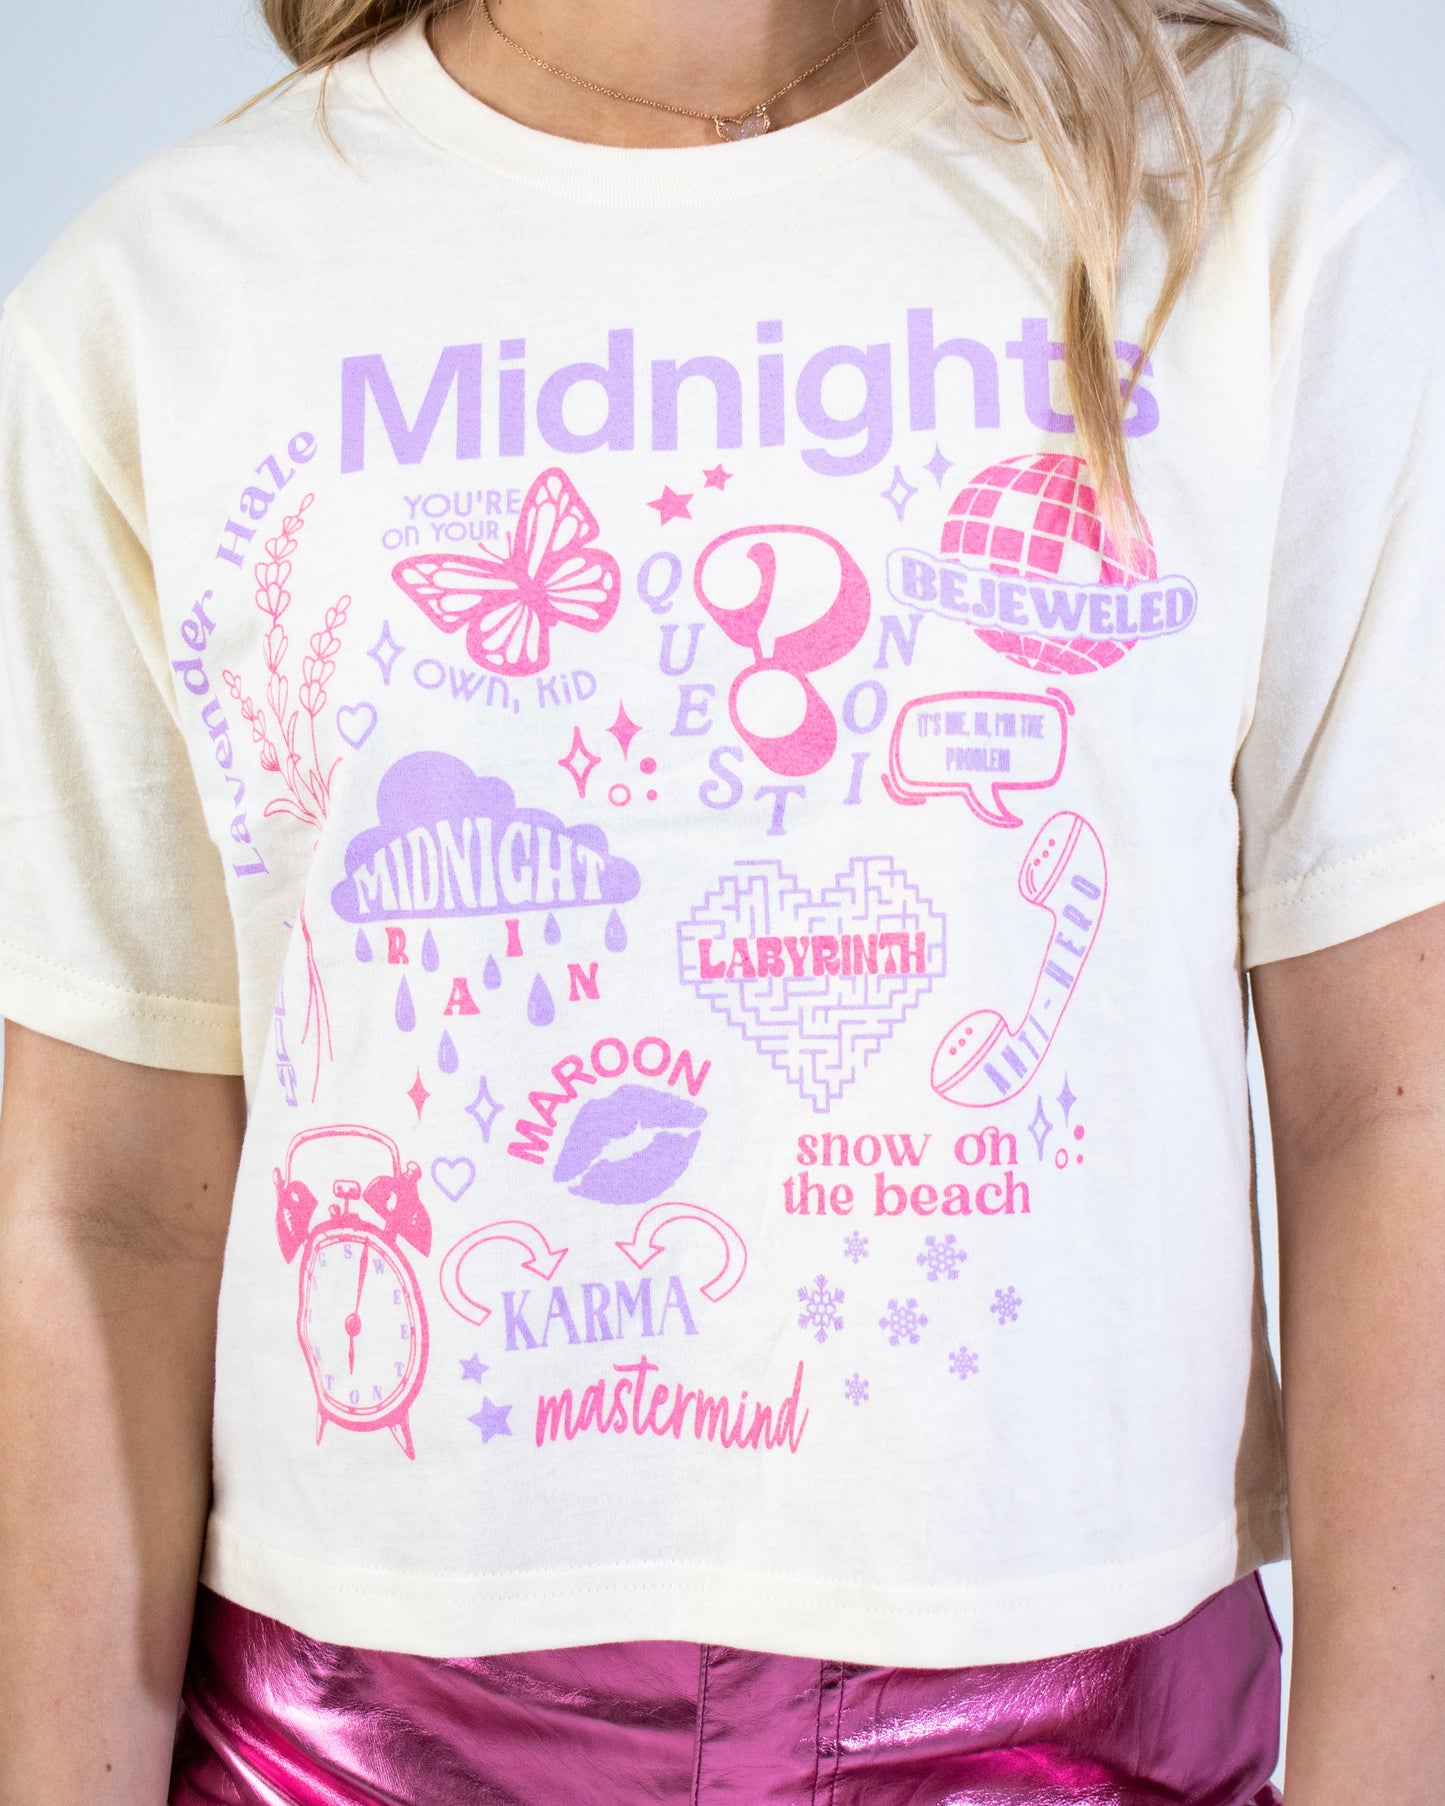 Midnights Cropped Tee